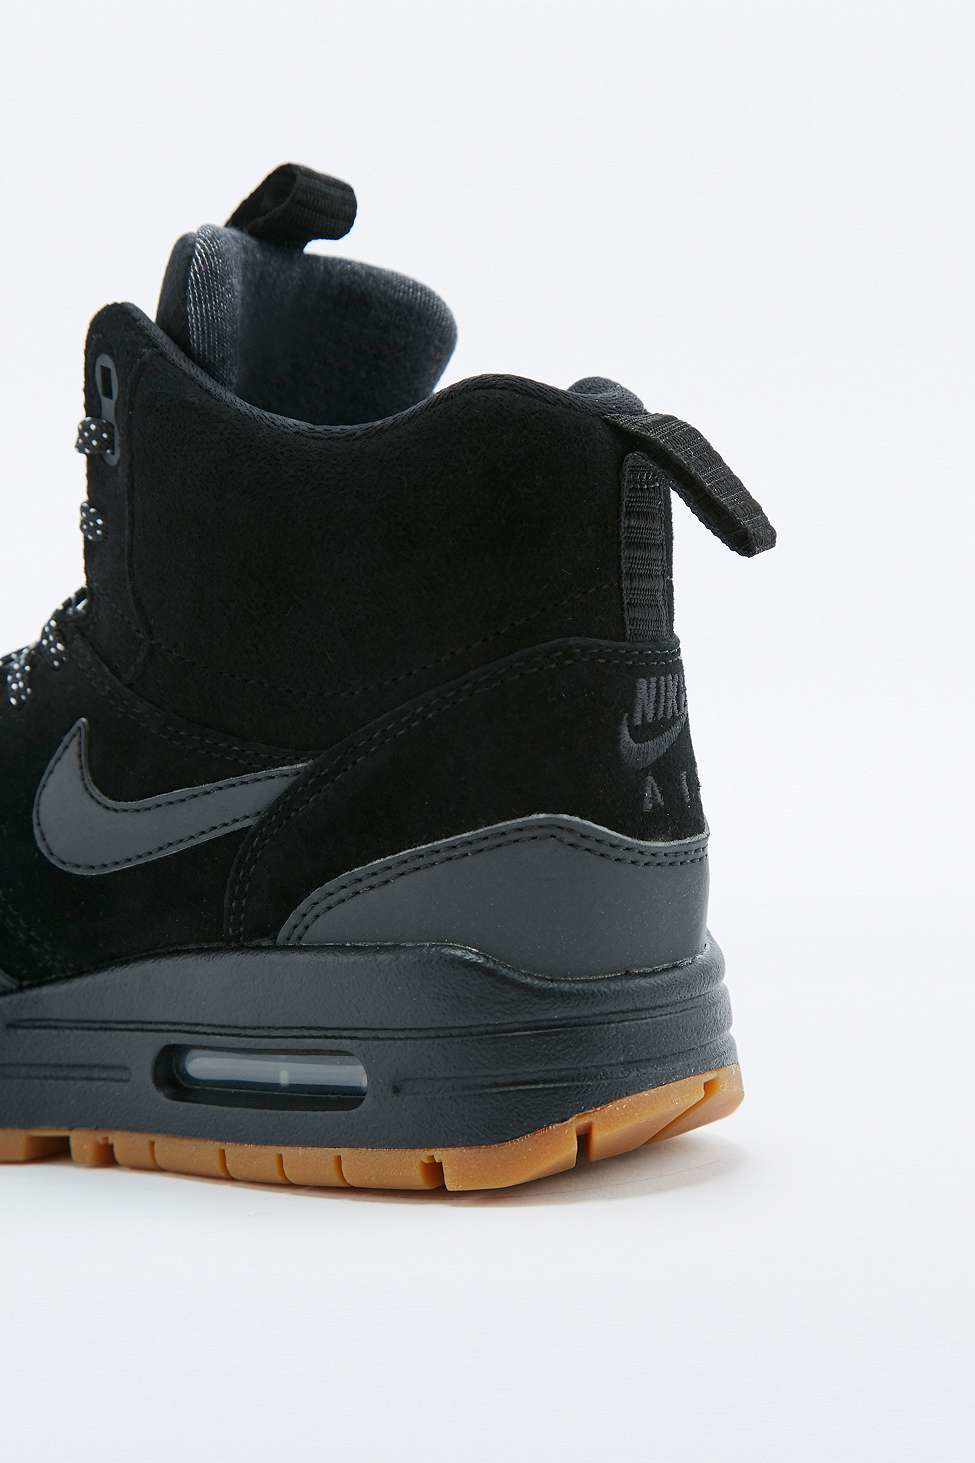 Nike Leather Air Max 1 Black Trainer Boots for Men - Lyst